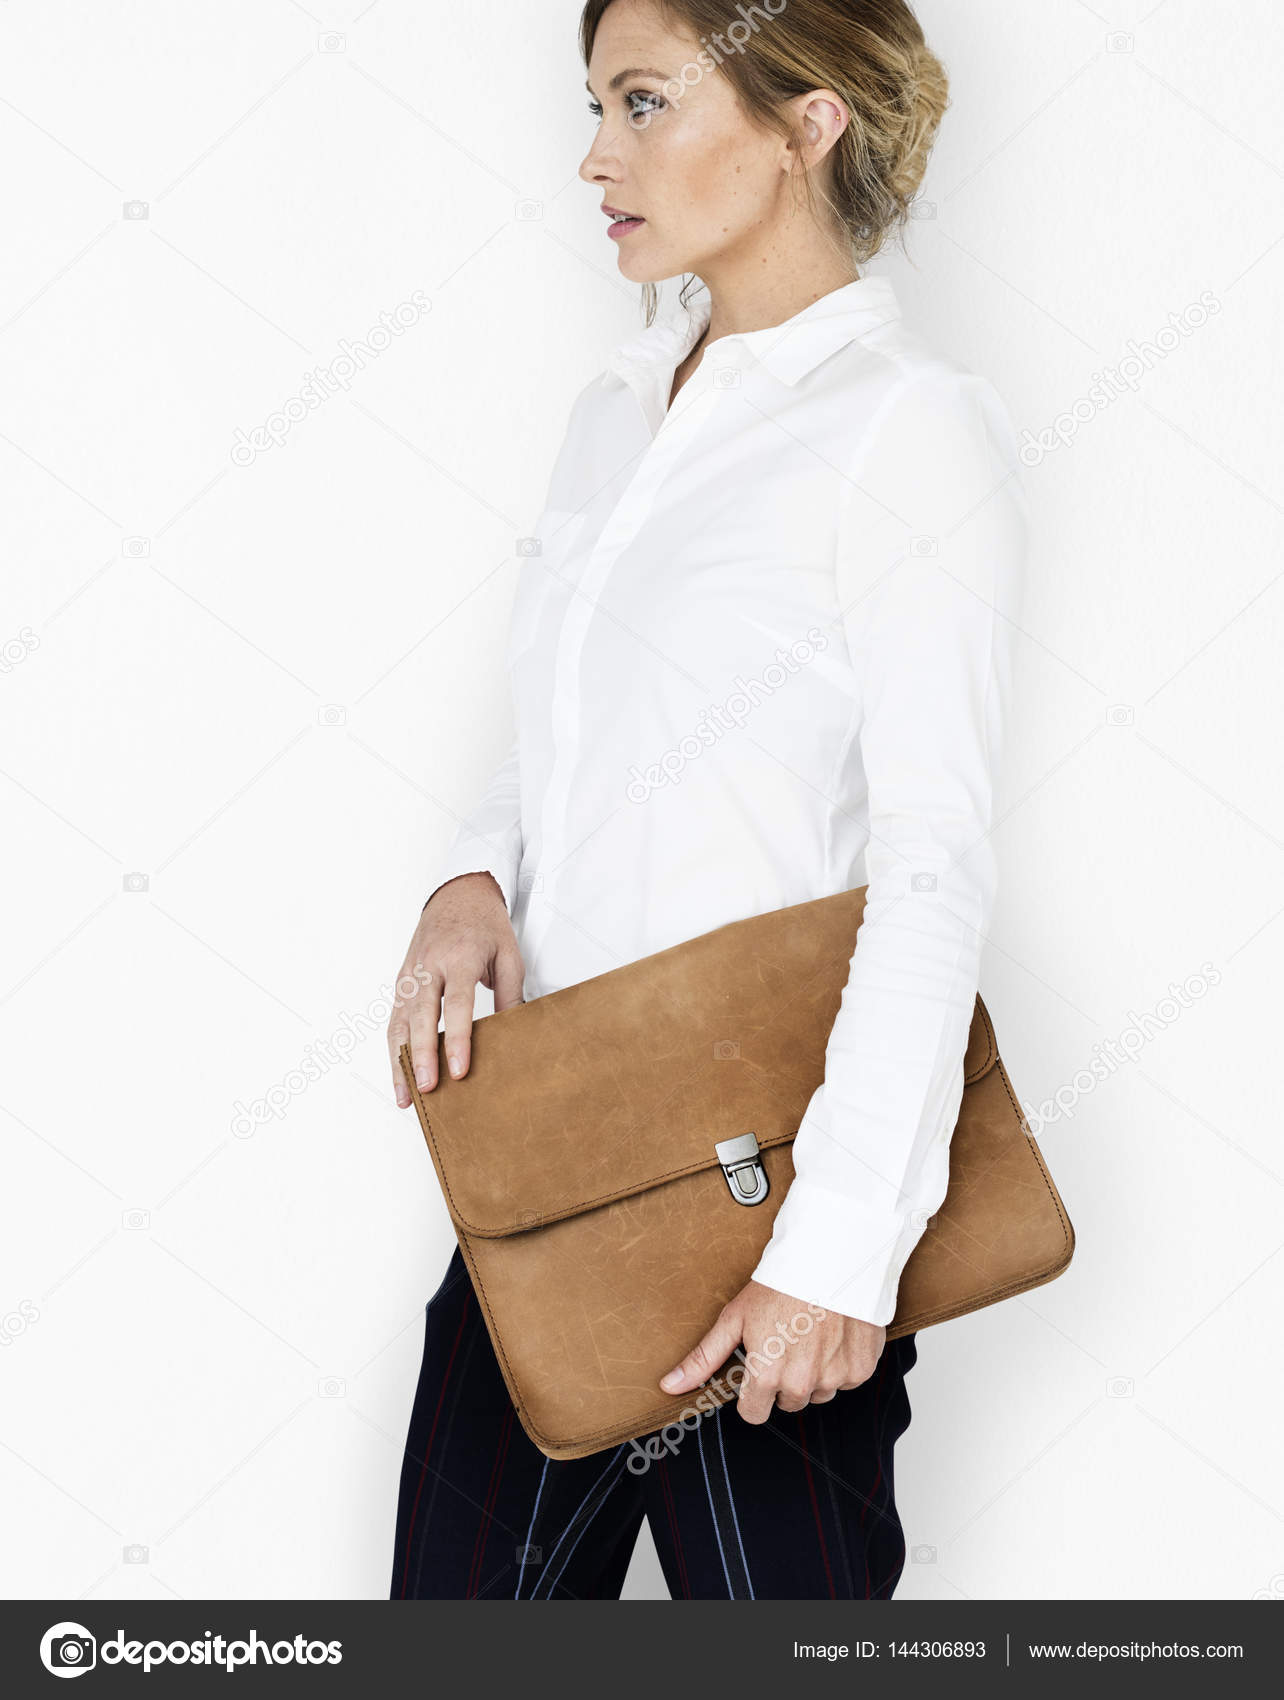 Business Woman Holding Bag — Stock Photo © Rawpixel #144306893